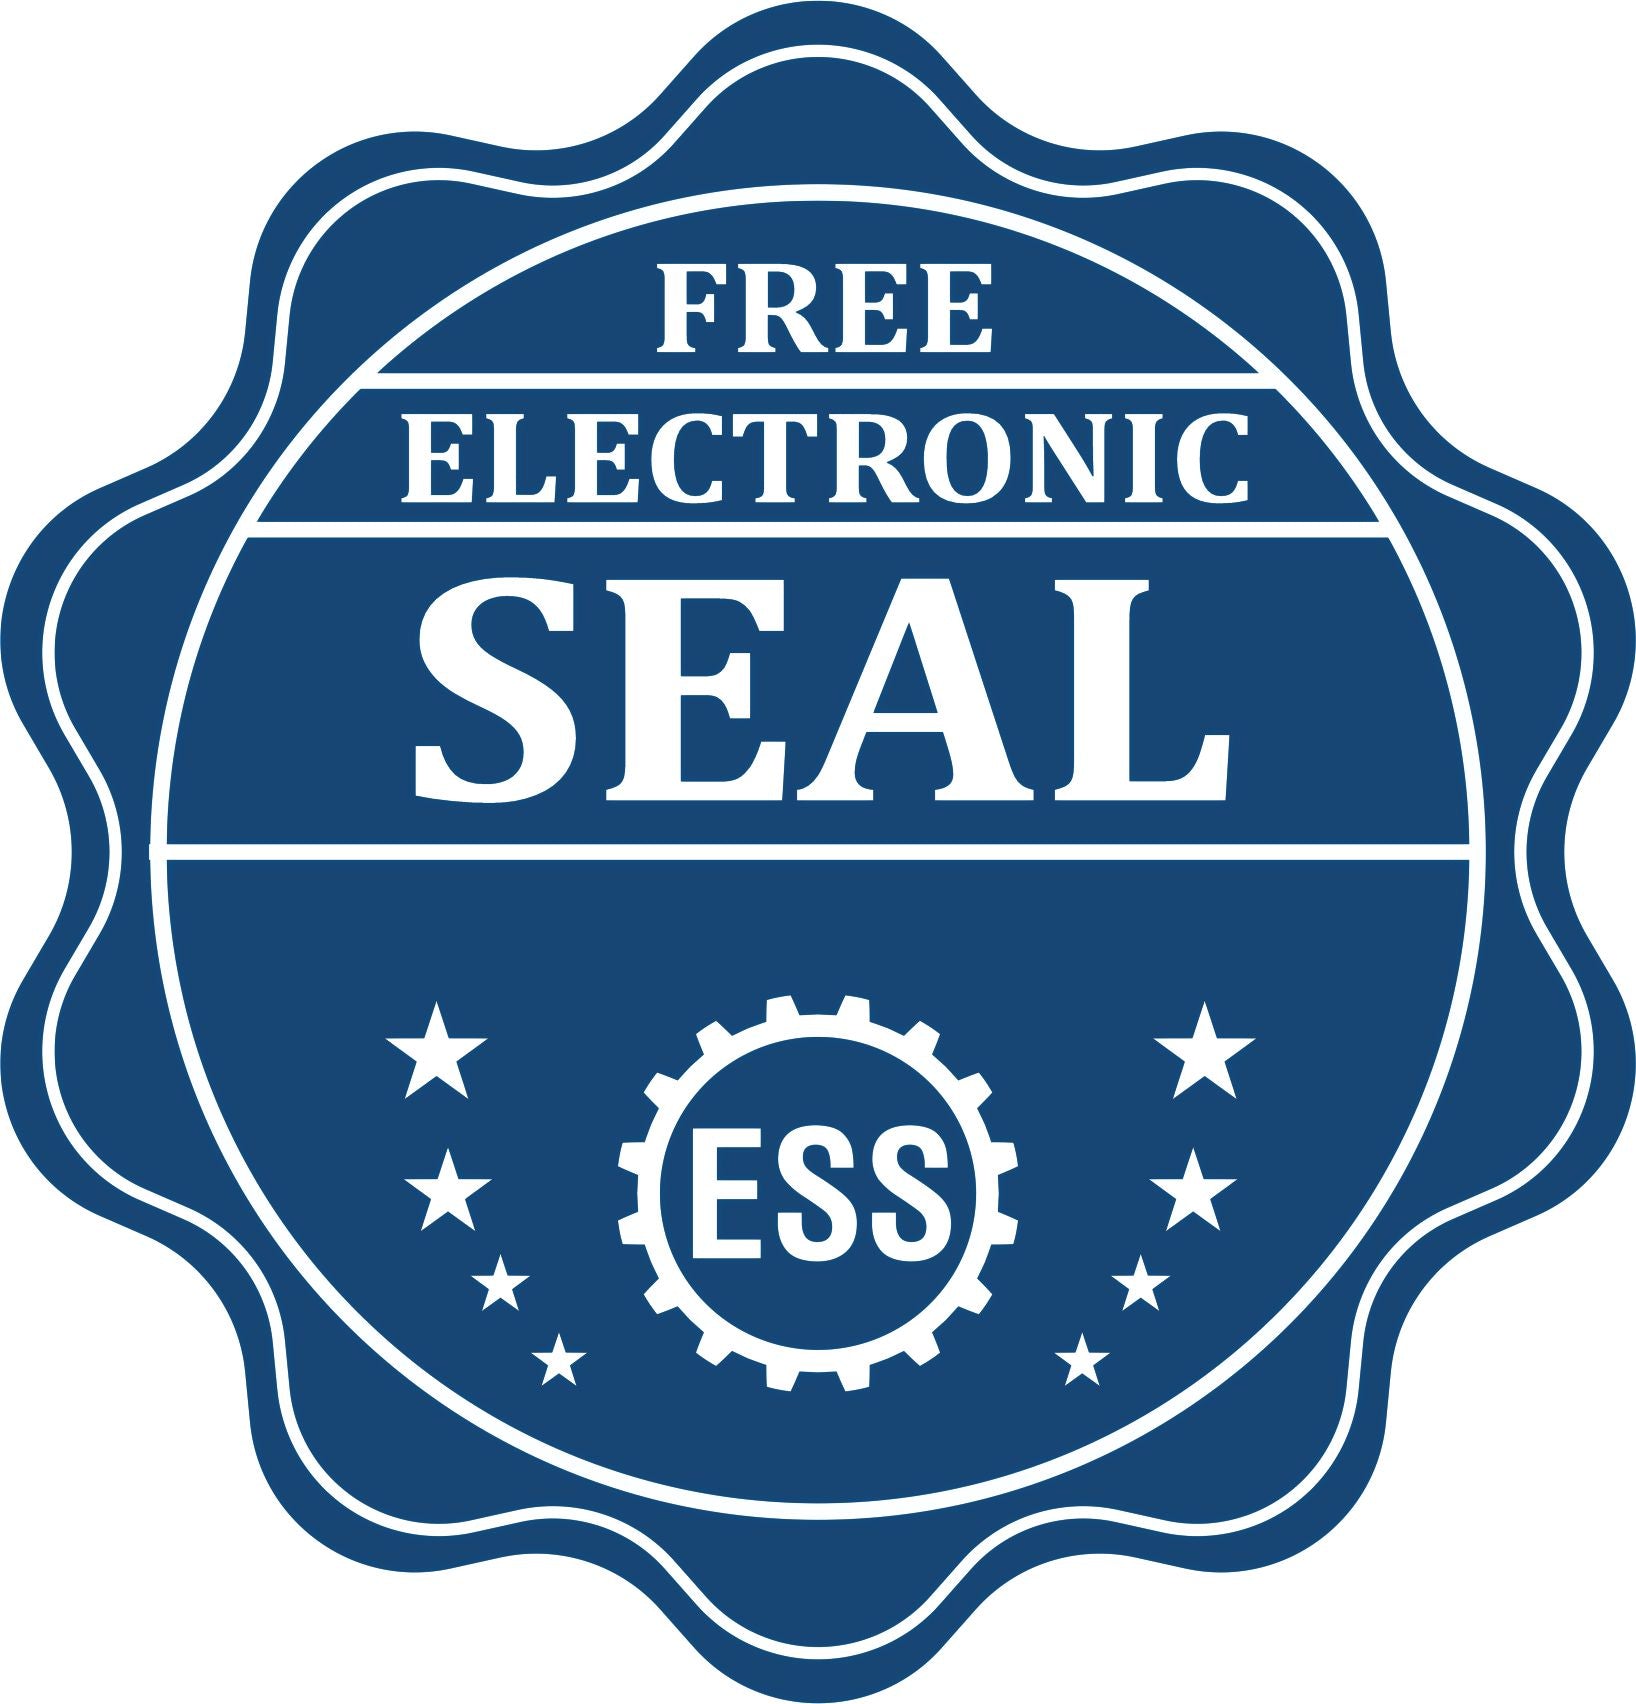 A badge showing a free electronic seal for the Heavy Duty Tennessee Landscape Architect Cast Iron Embosser with stars and the ESS gear on the emblem.